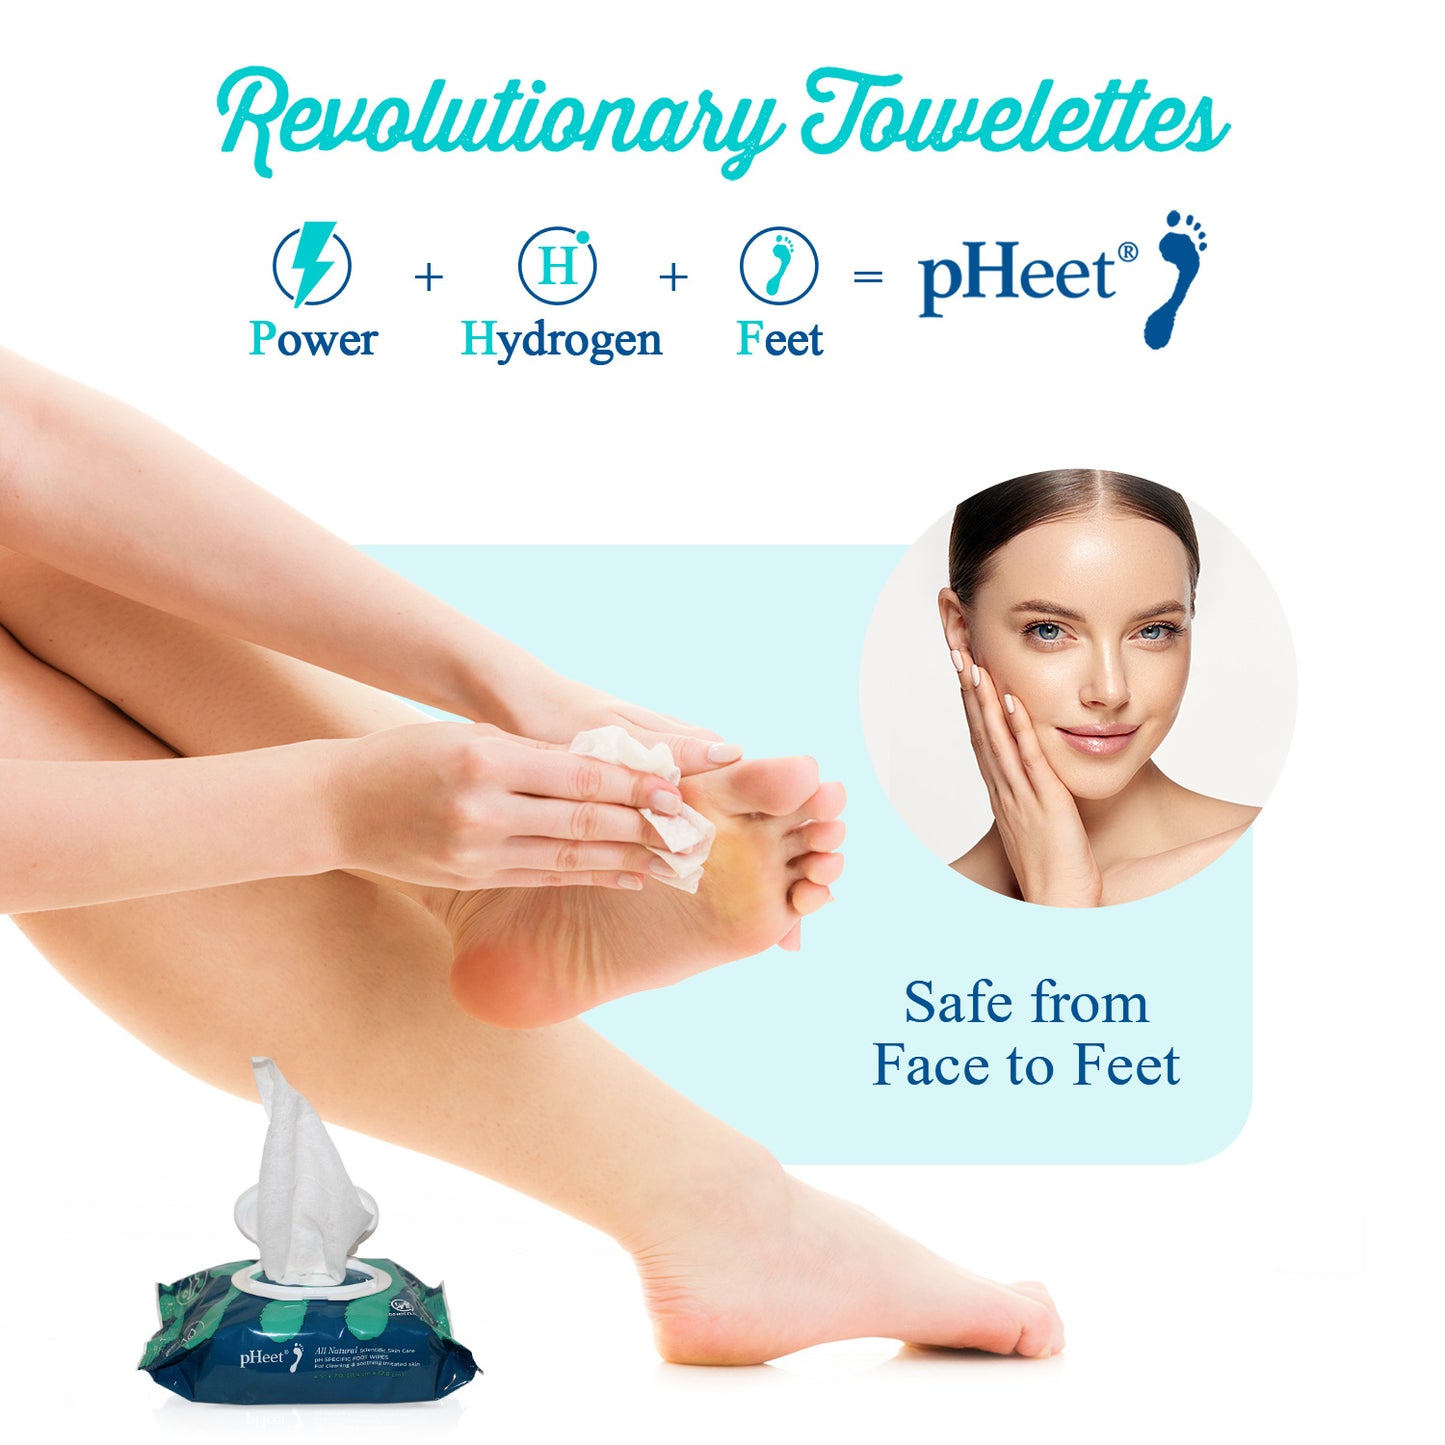 Revolutionary Towelettes: Power + Hydrogen + Feet = pHeet Foot Wipes. It is safe from face to feet.